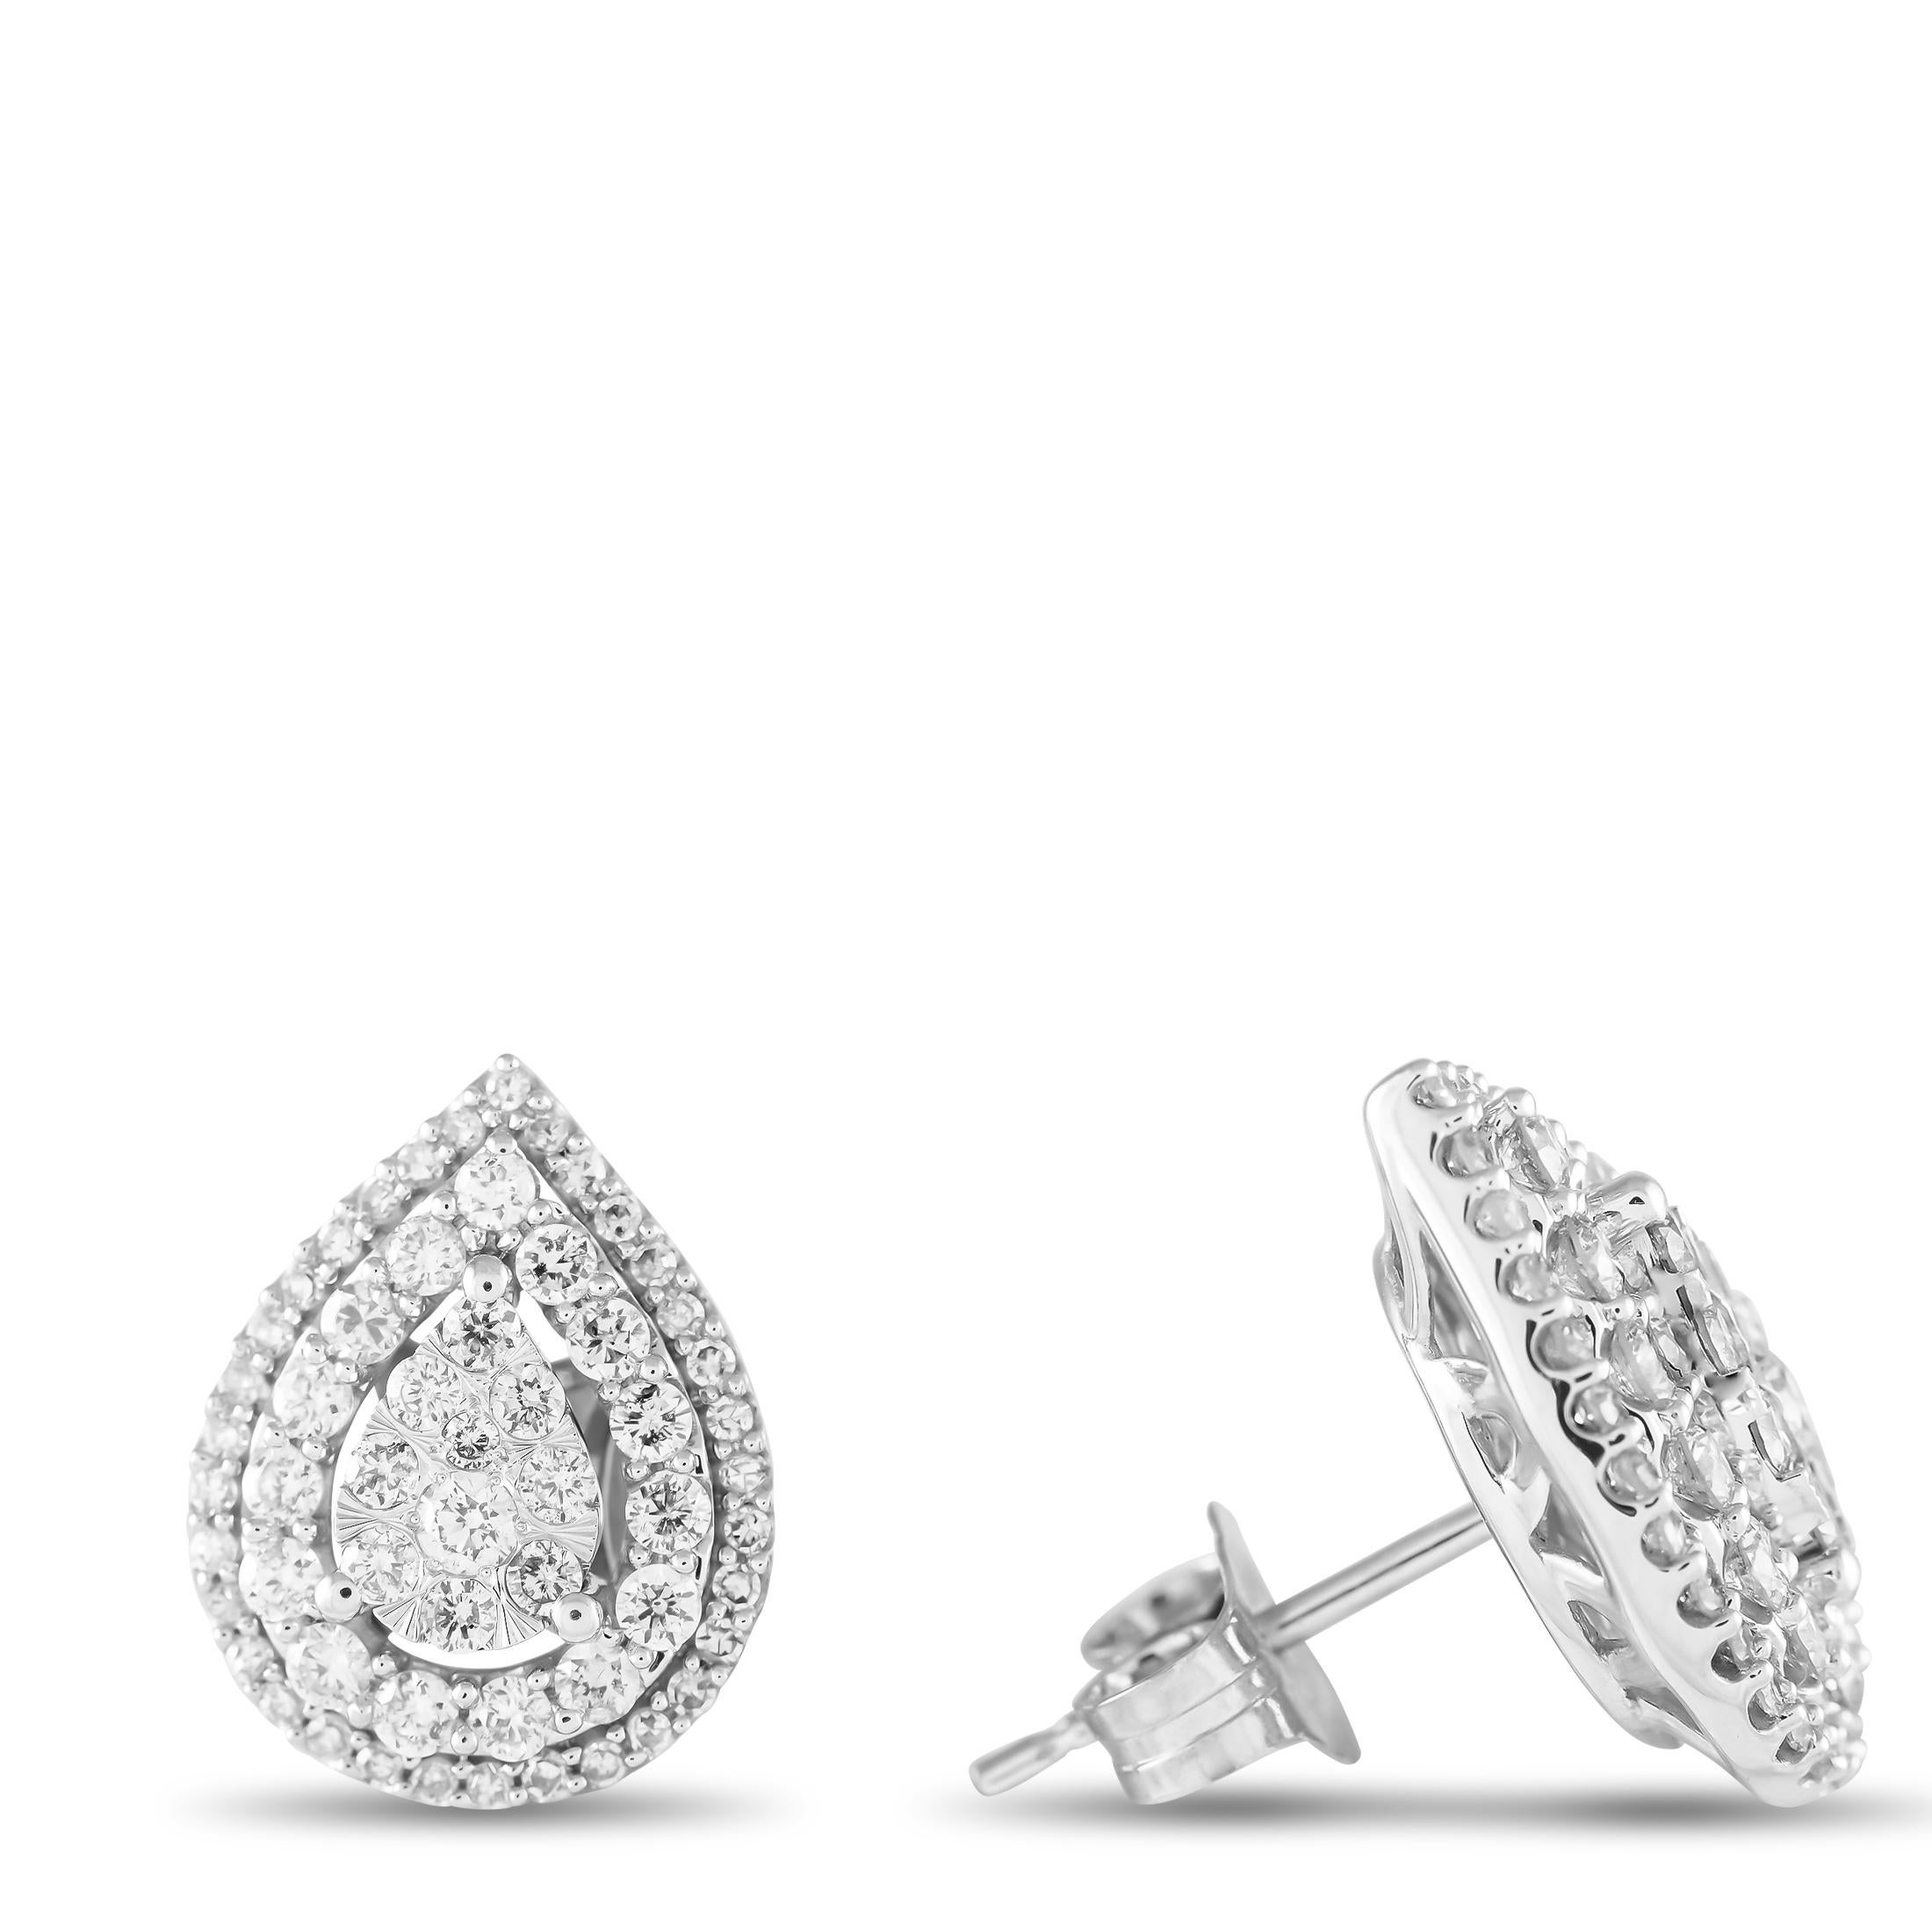 A chic, pear-shaped setting crafted from 14K White Gold serves as a stylish foundation for these impressive earrings. Adorned with Diamonds totaling 1.0 carats, each one of these exquisite earrings measures 0.5 long by 0.45 wide.This jewelry piece